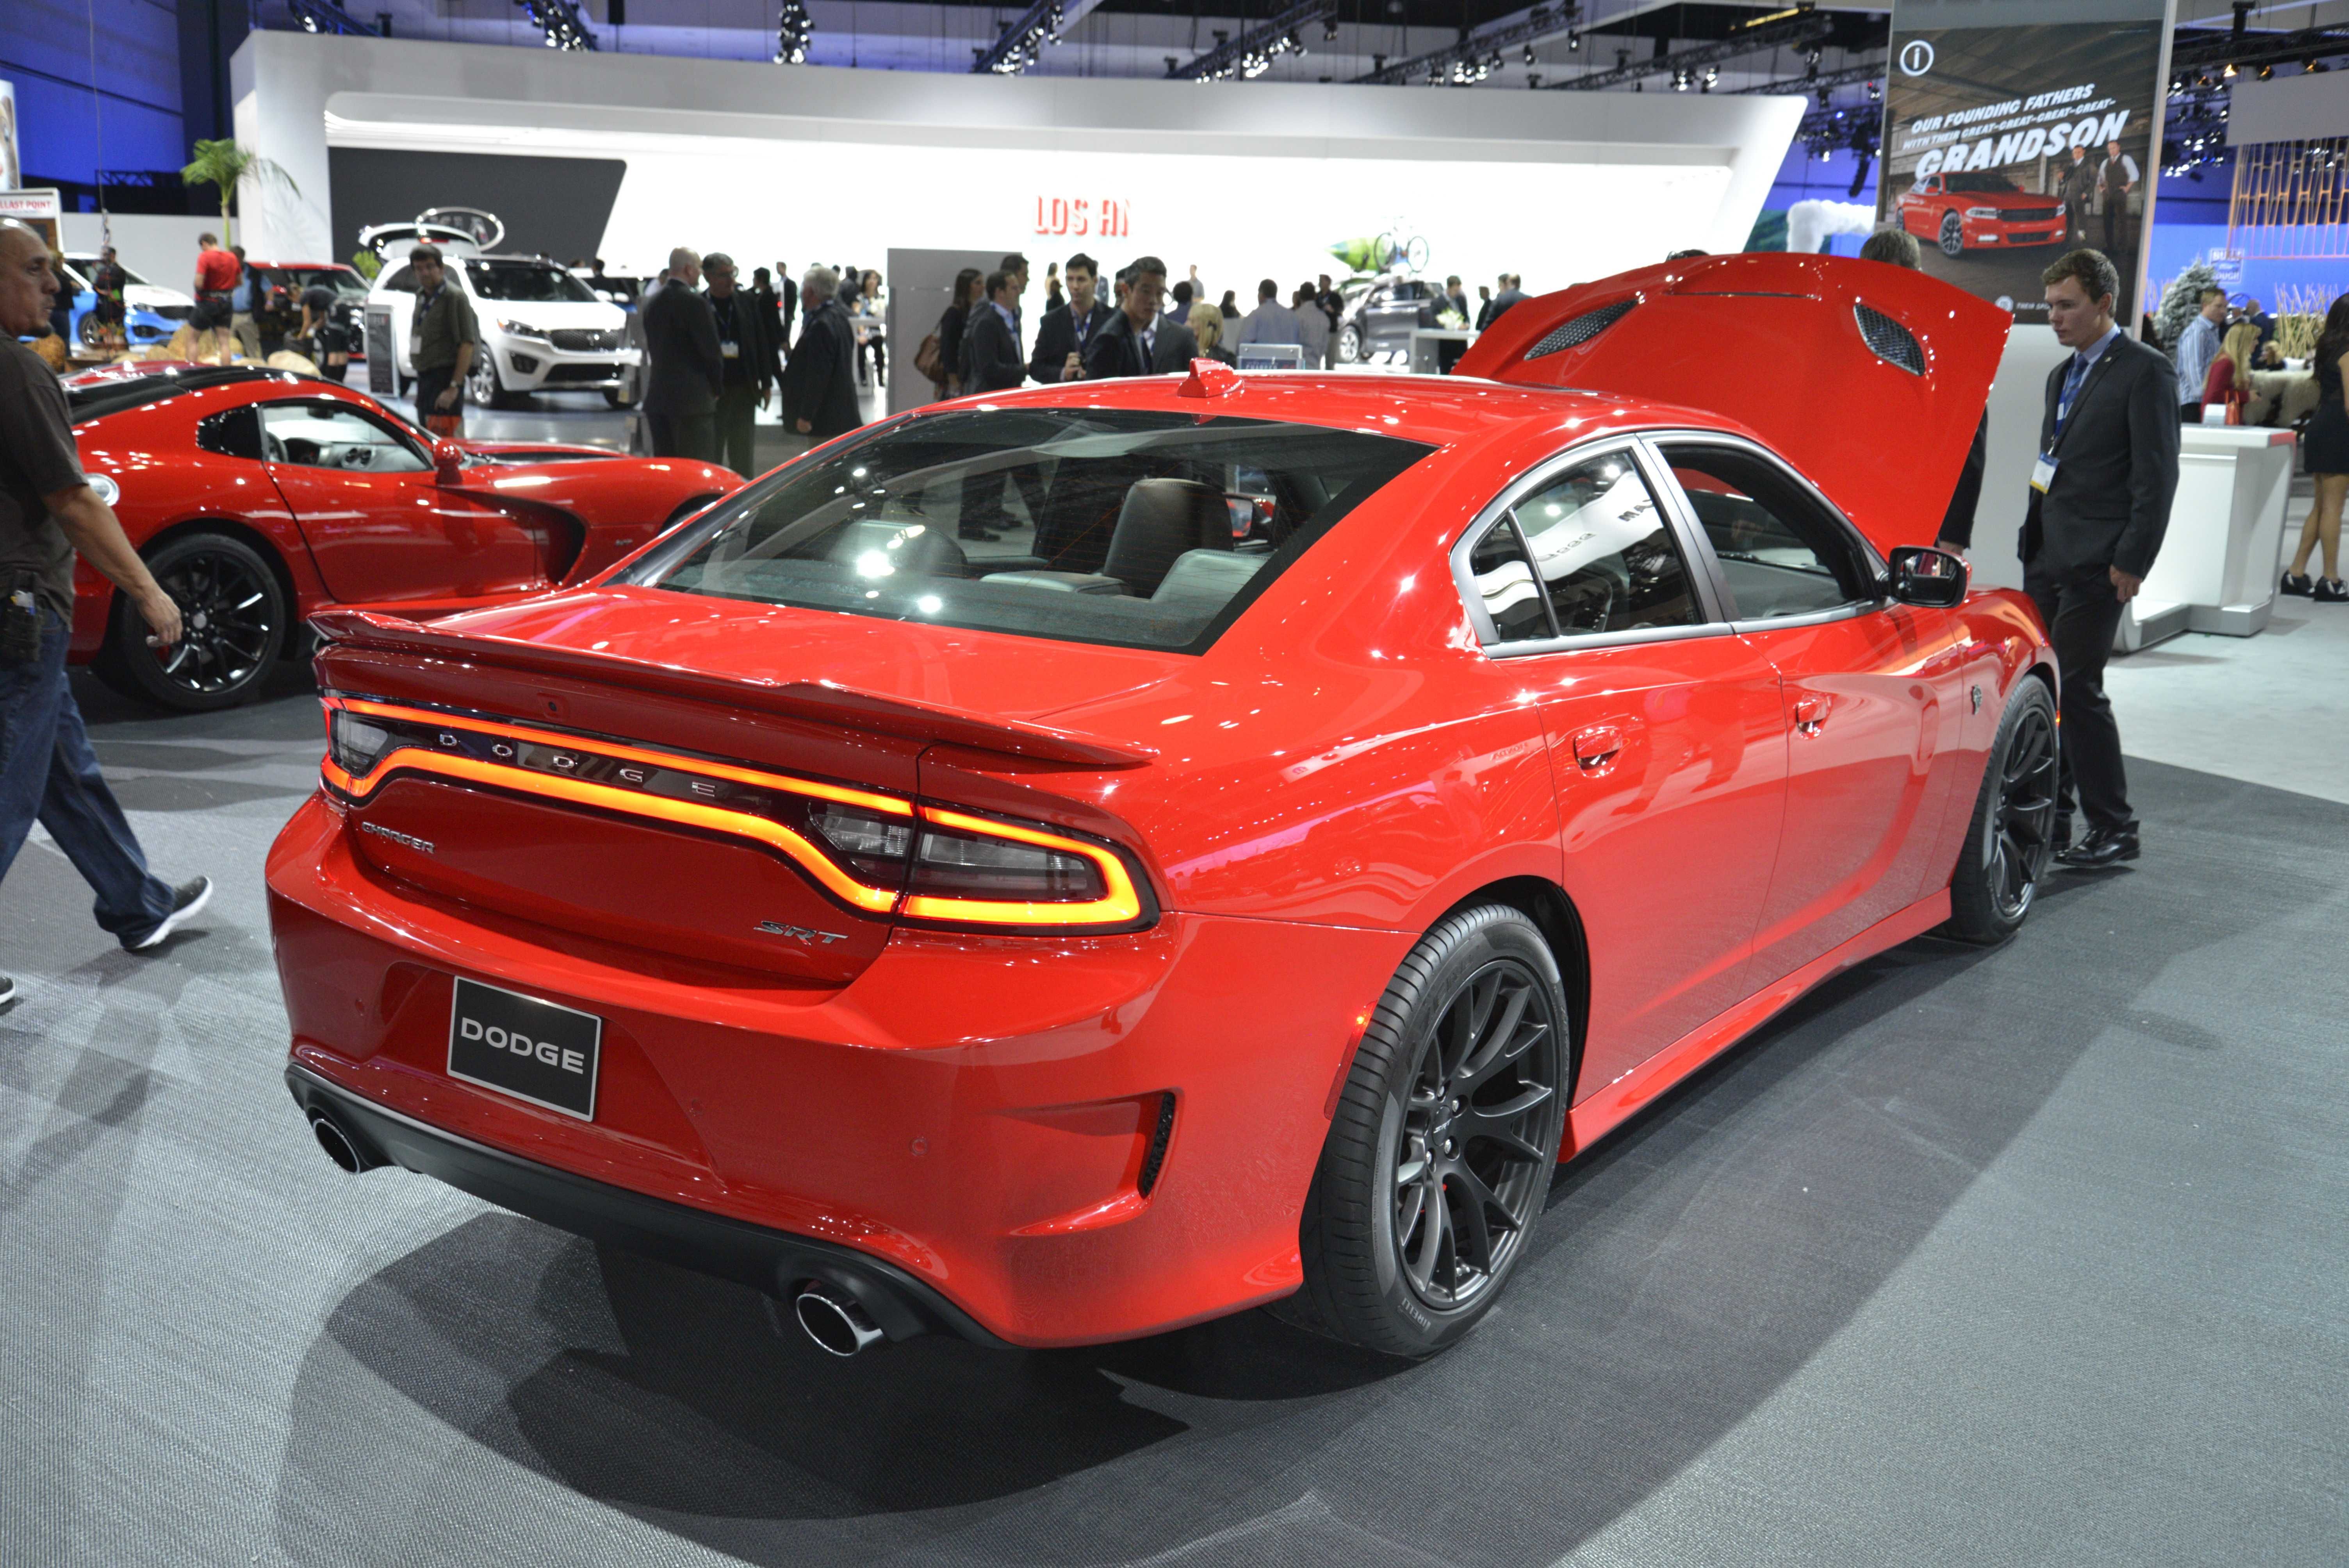 Dodge Charger Hellcat on show.